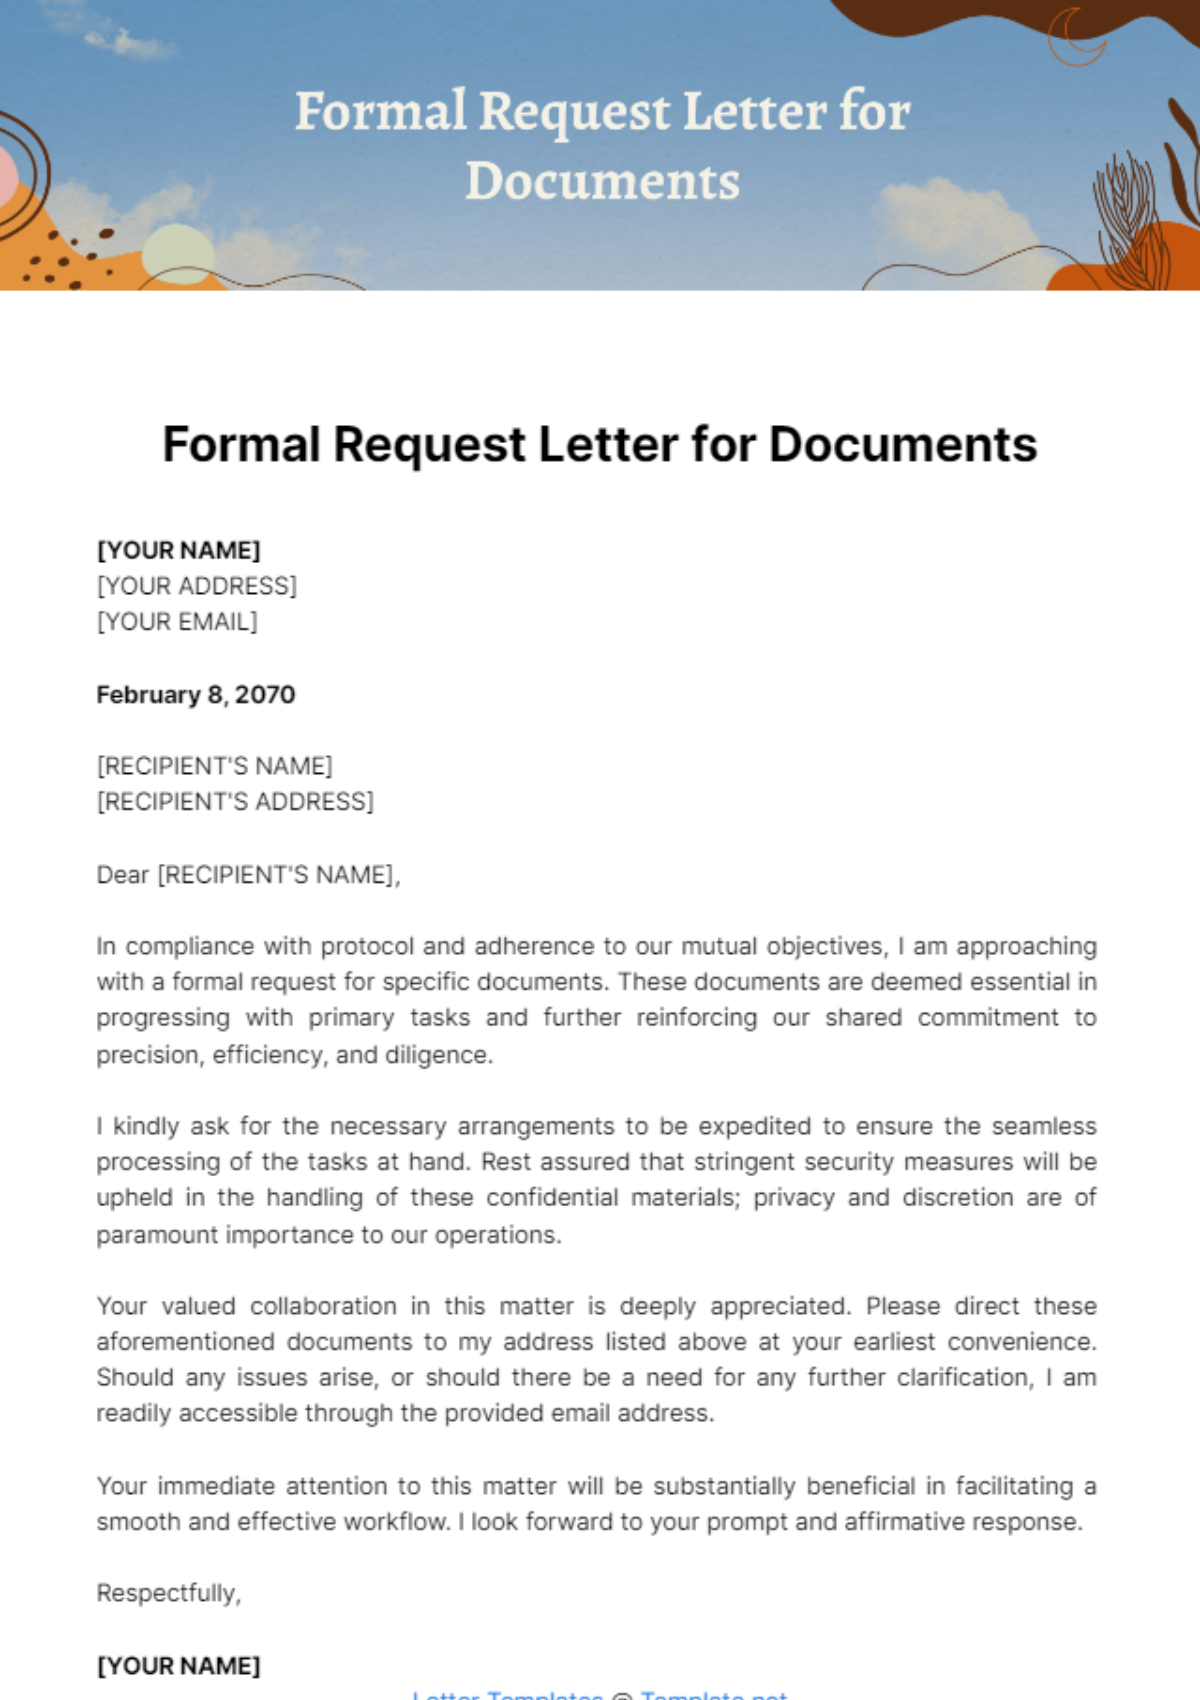 Free Formal Request Letter for Documents Template